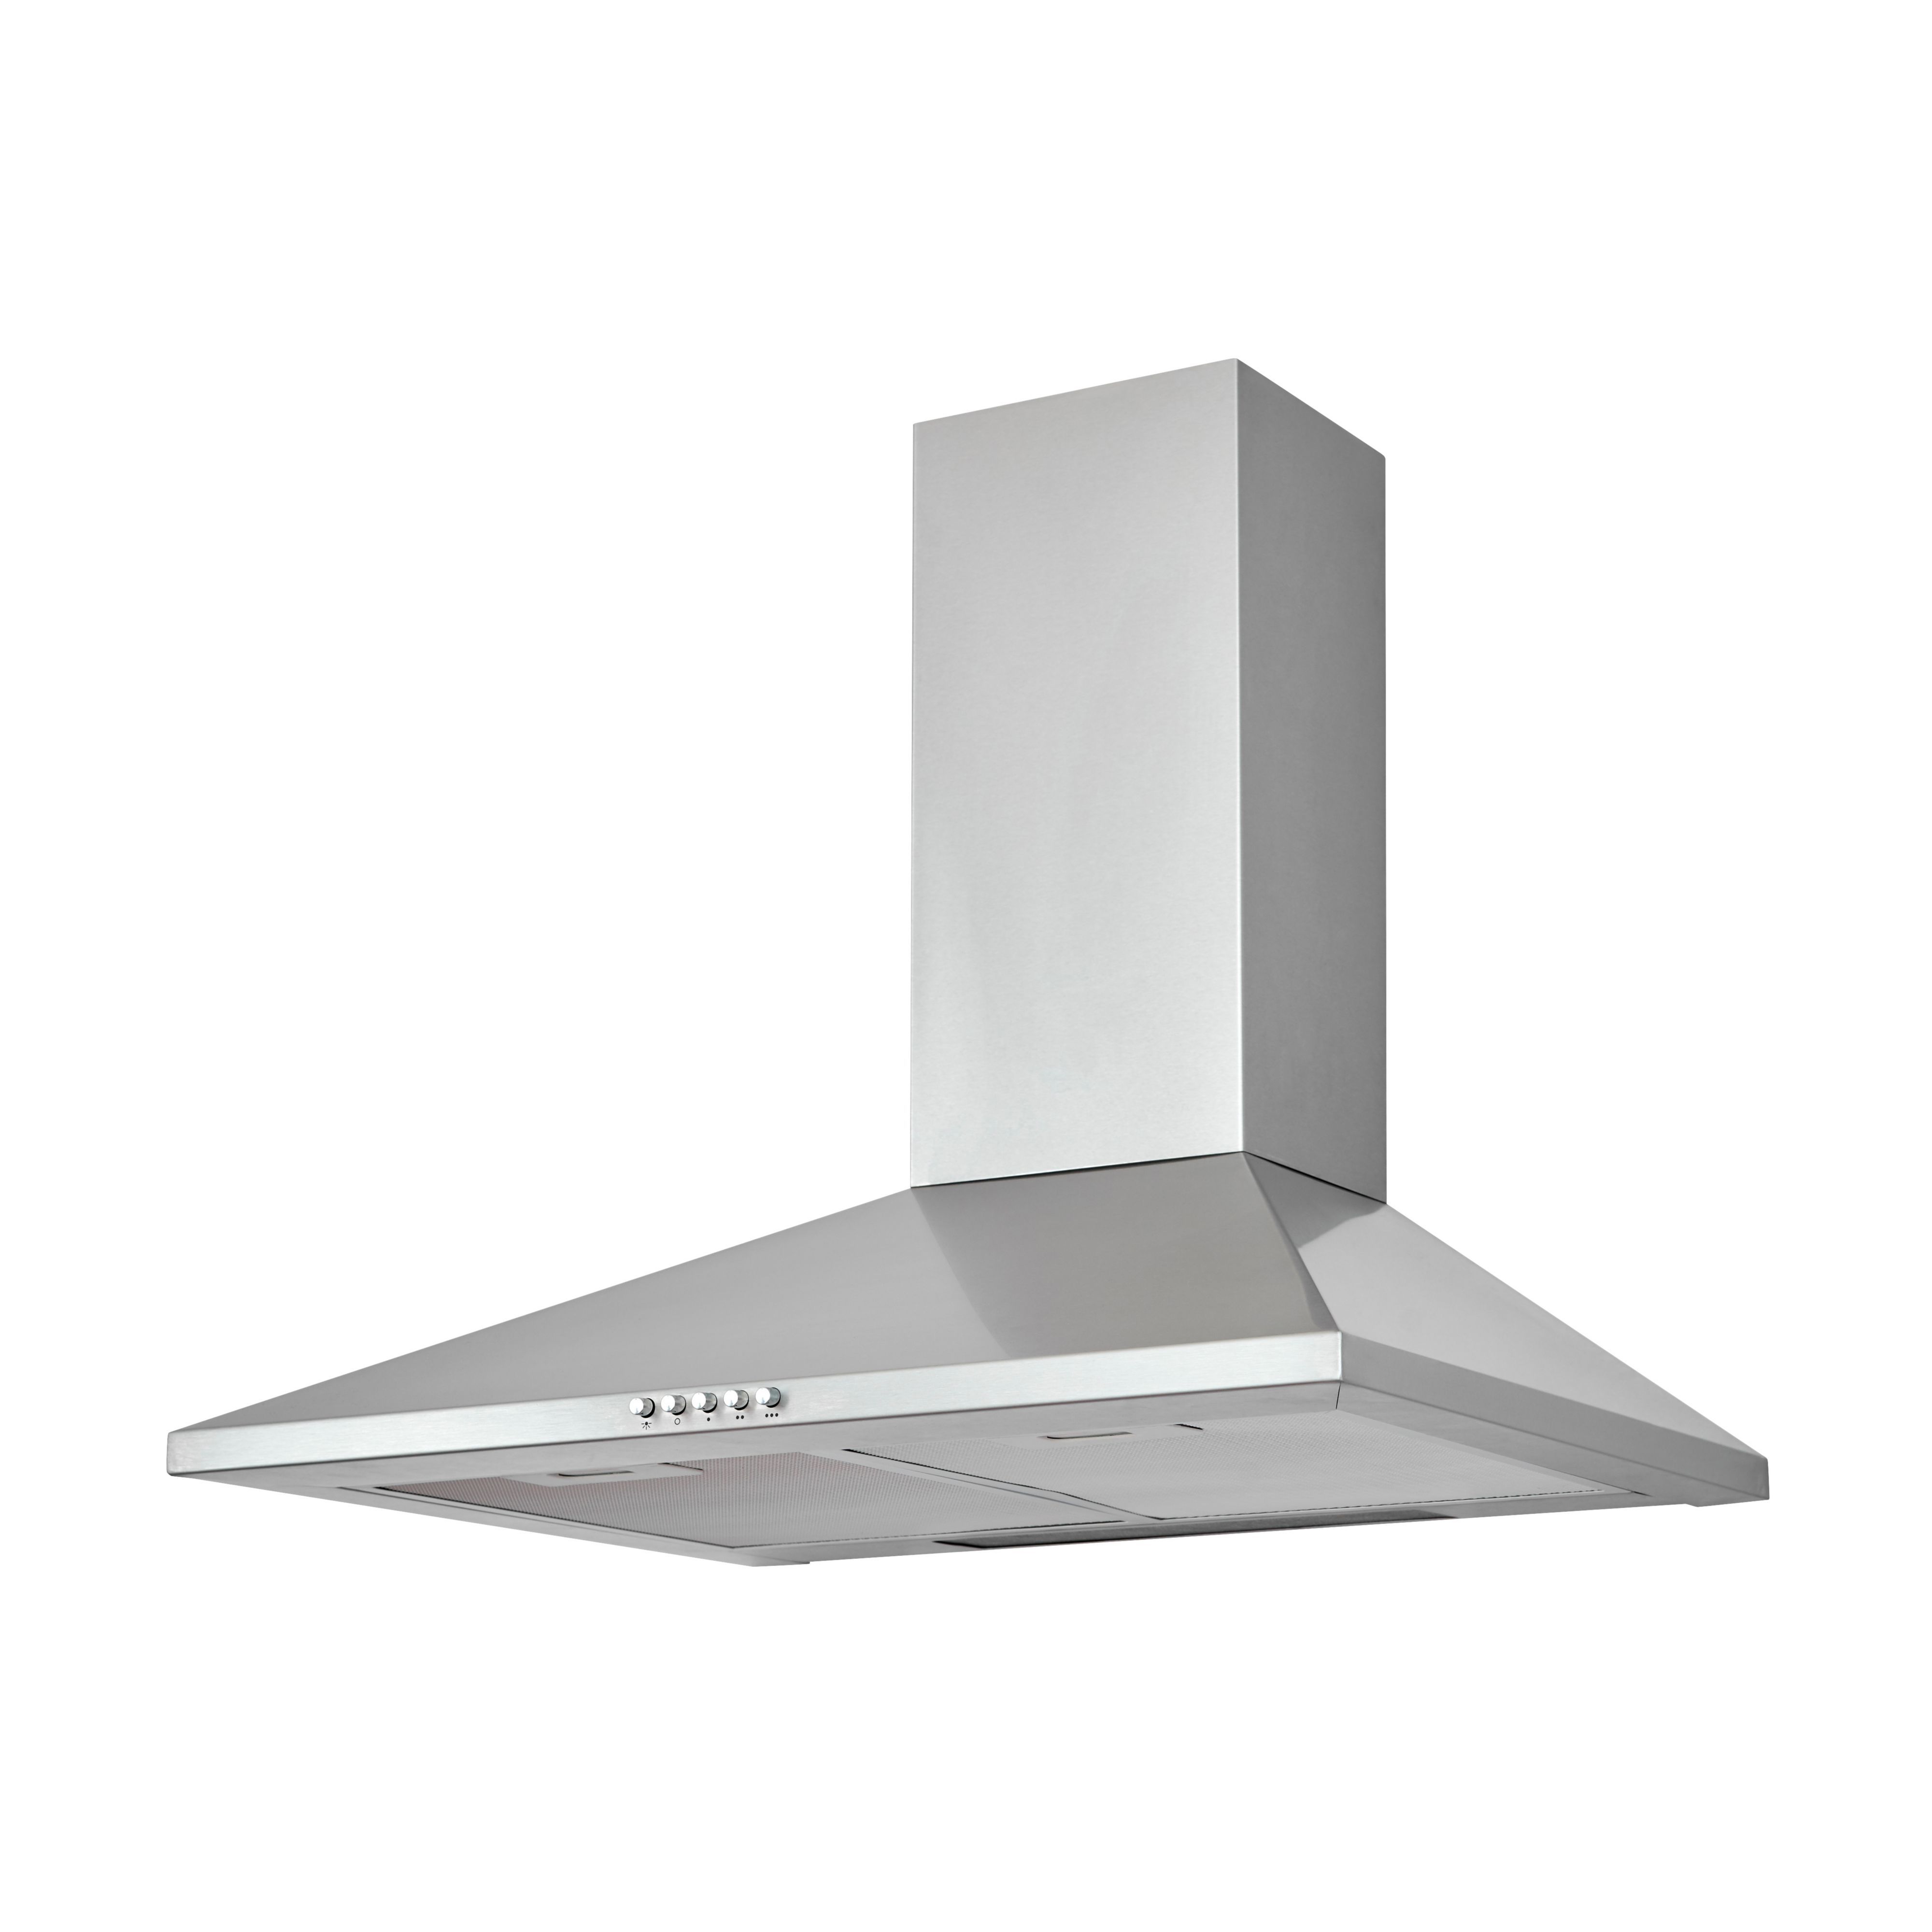 CHS60 Stainless steel Chimney Cooker hood (W)60cm - Inox | Tradepoint